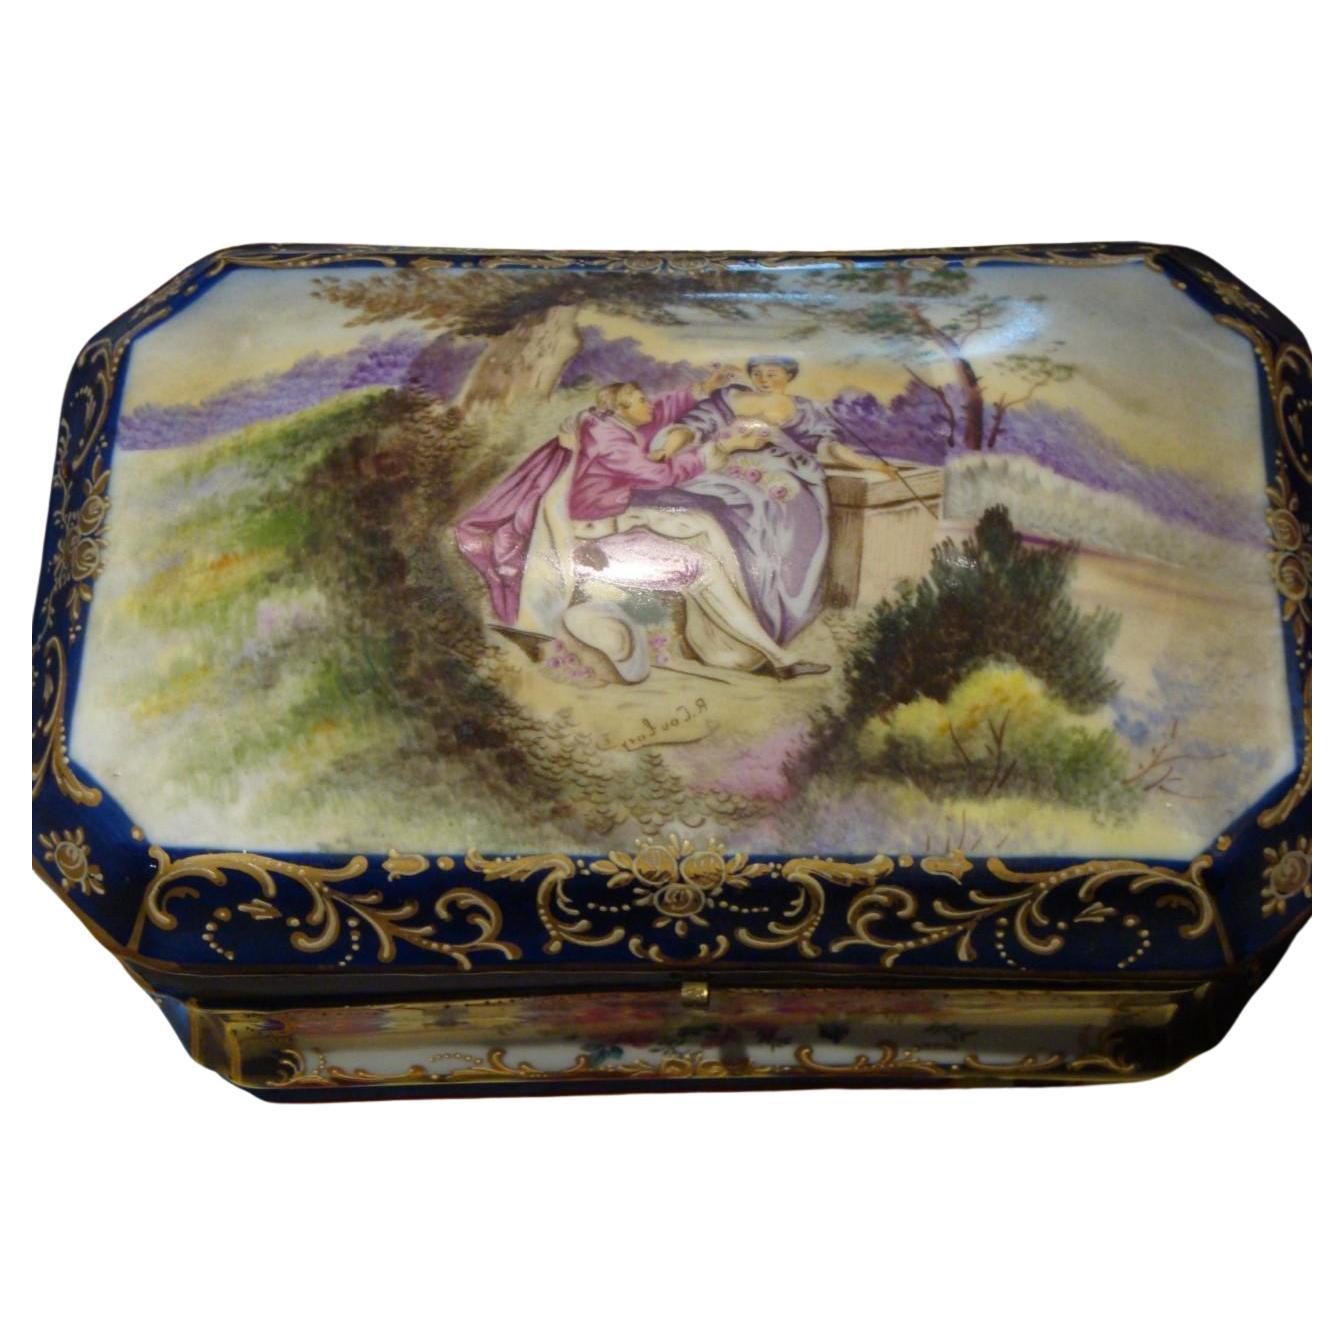 Rare Important Gorgeous Dresden Style Sevres Style Porcelain Jewelry Box Casket